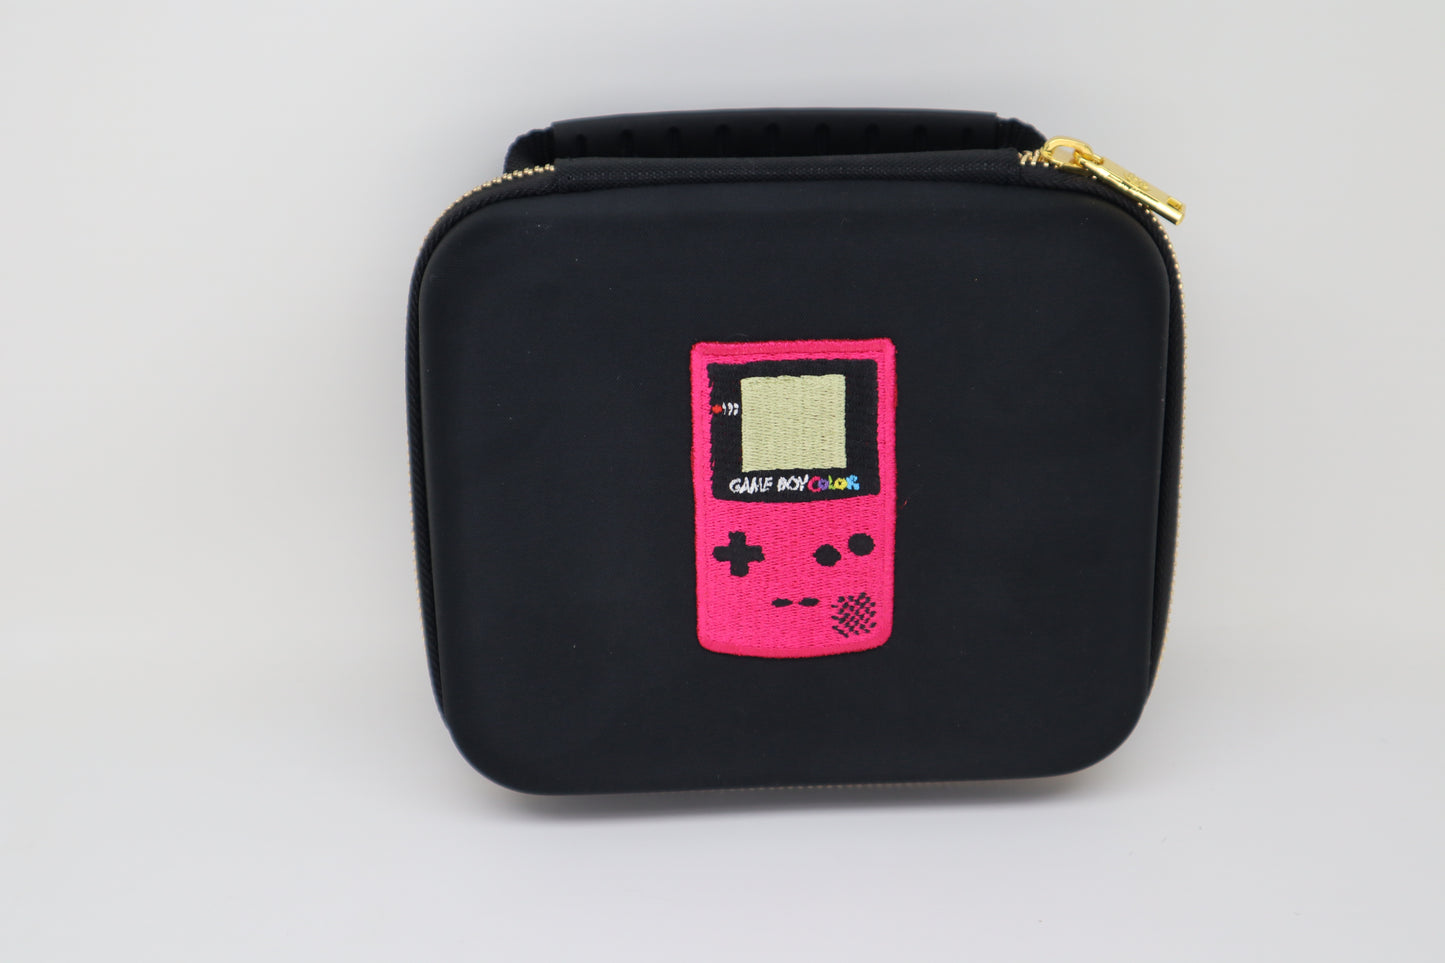 Custom TNC Case 4 (Cherry Red GameBoy Color Vintage Handheld Console)